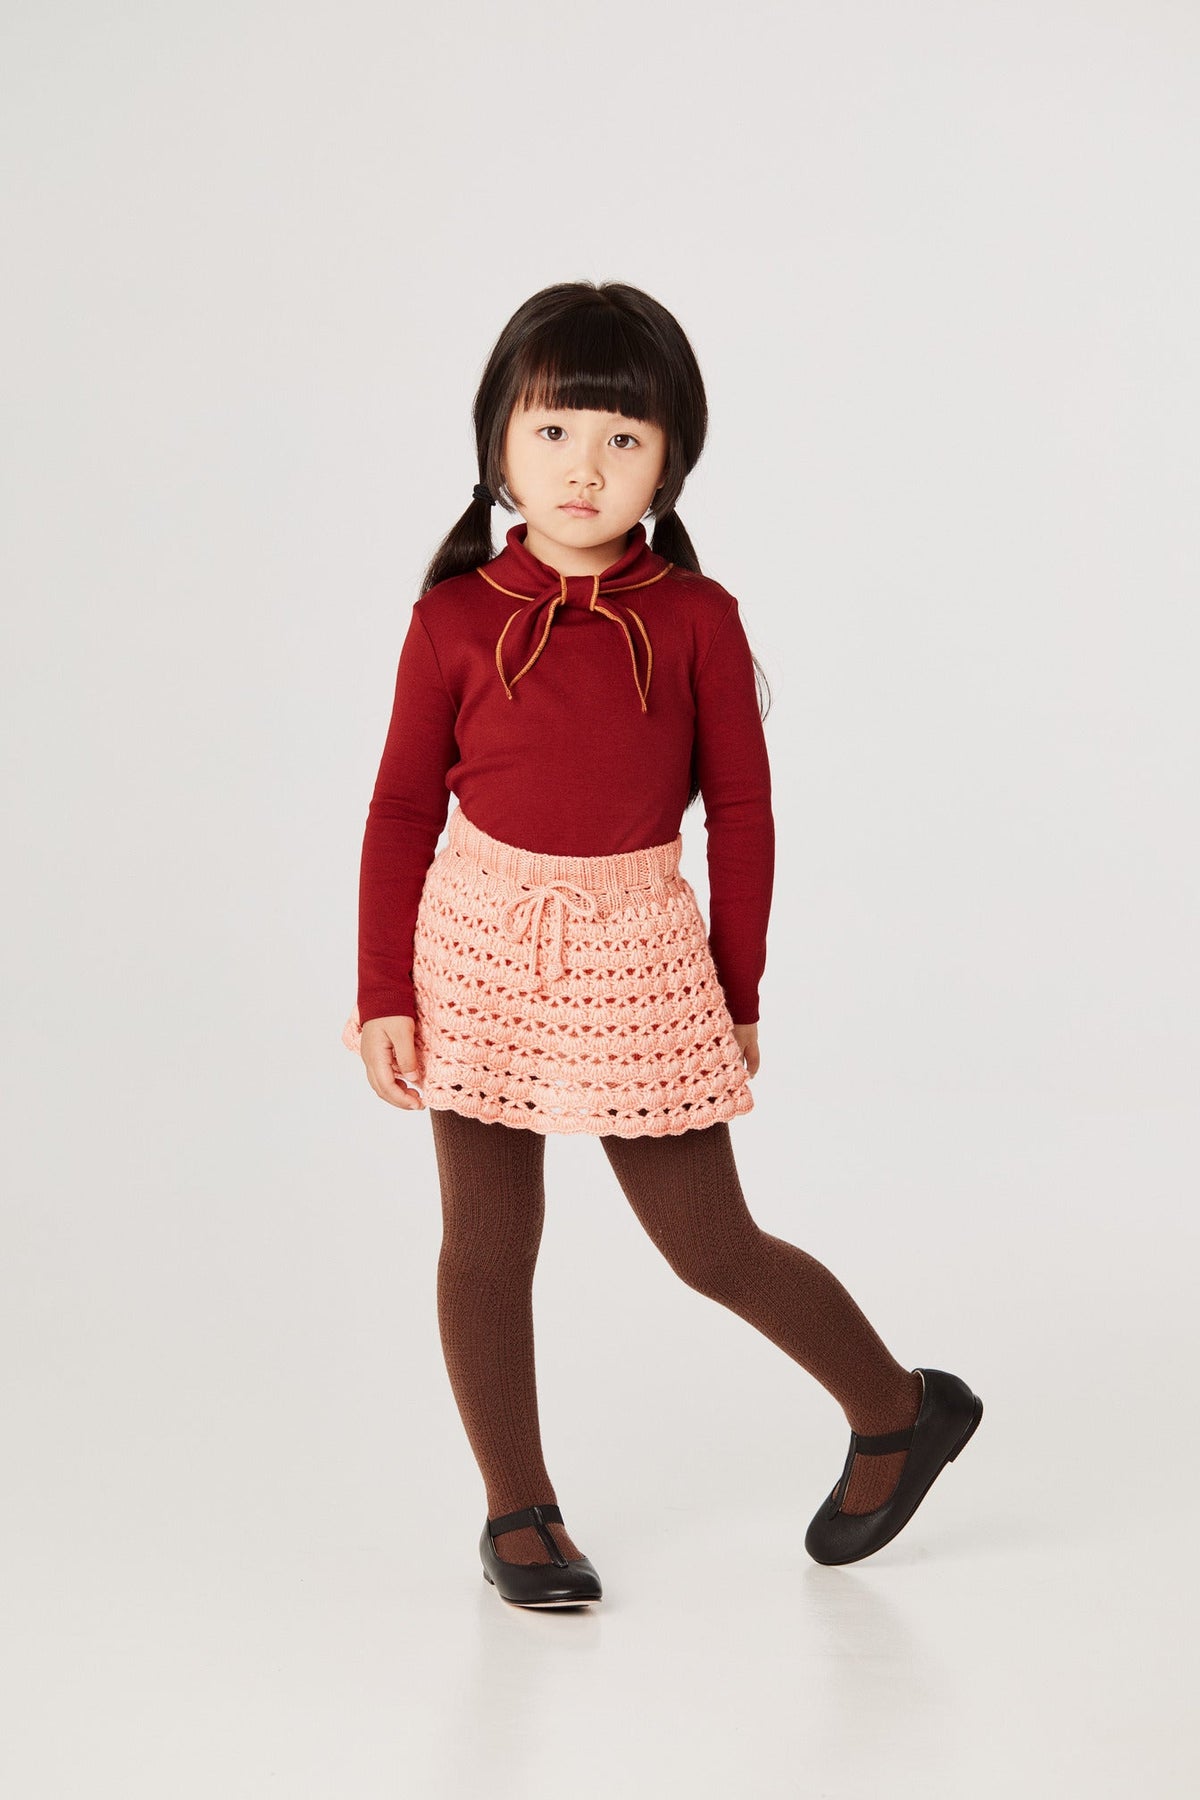 Scout Top - Cranberry+Model is 41 inches tall, 38lbs, wearing a size 4-5y